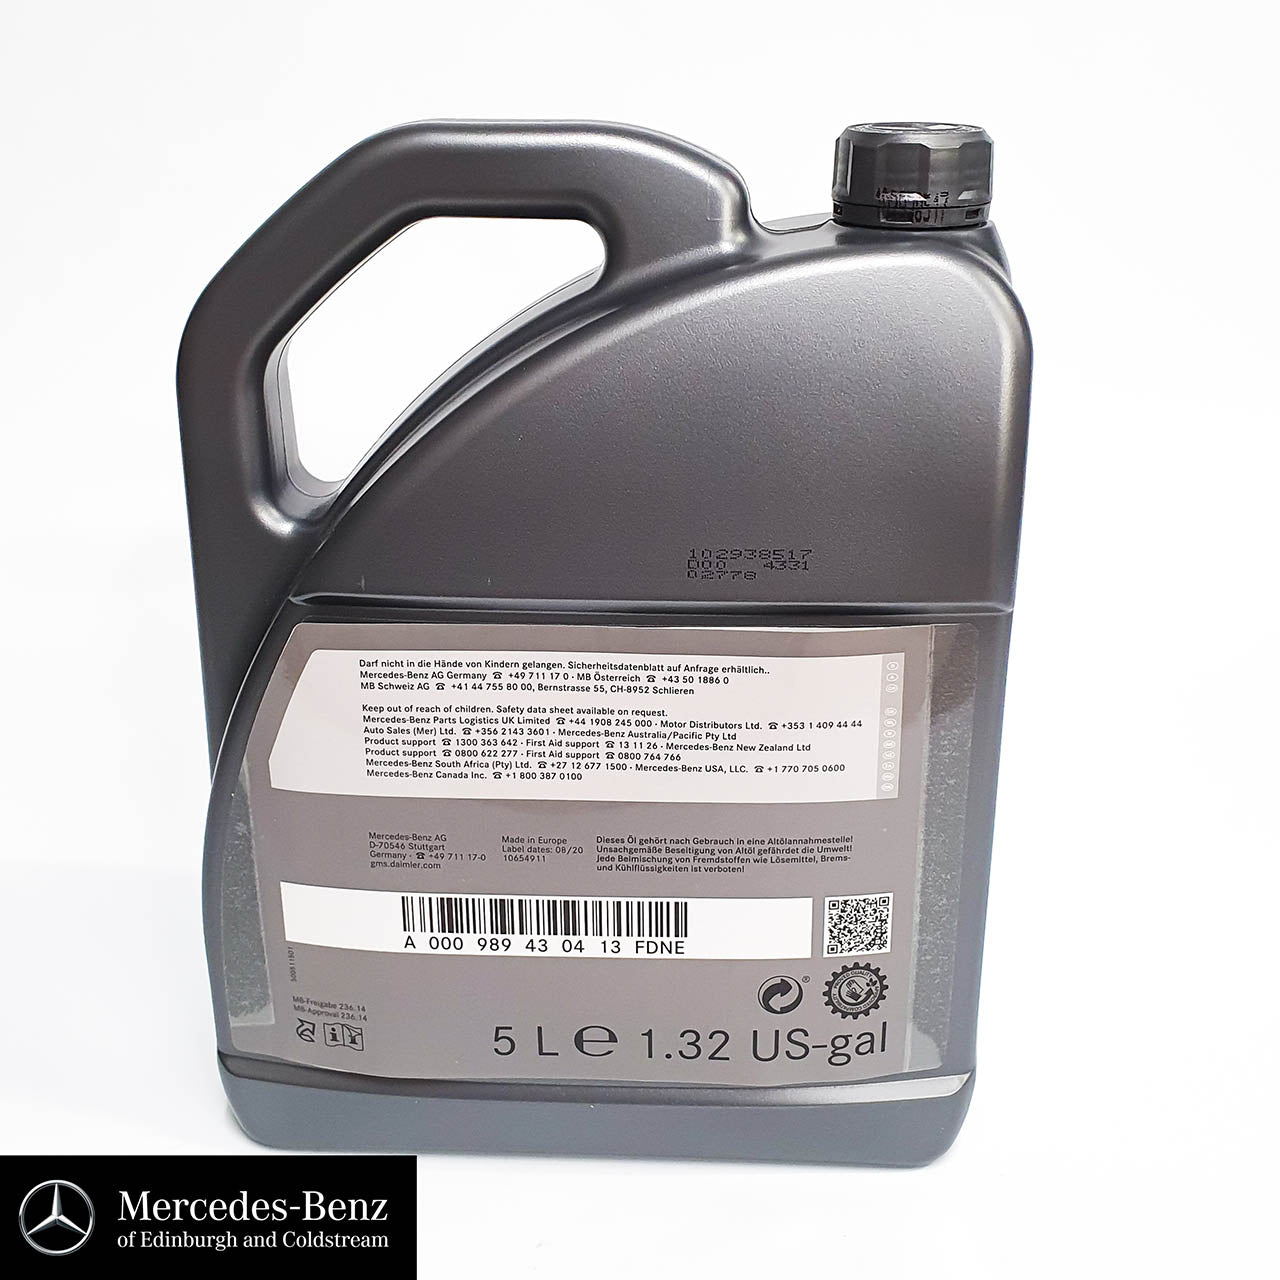 Genuine Mercedes-Benz 724.2 Automatic gearbox oil (RED) kit for conventional and hybrid cars